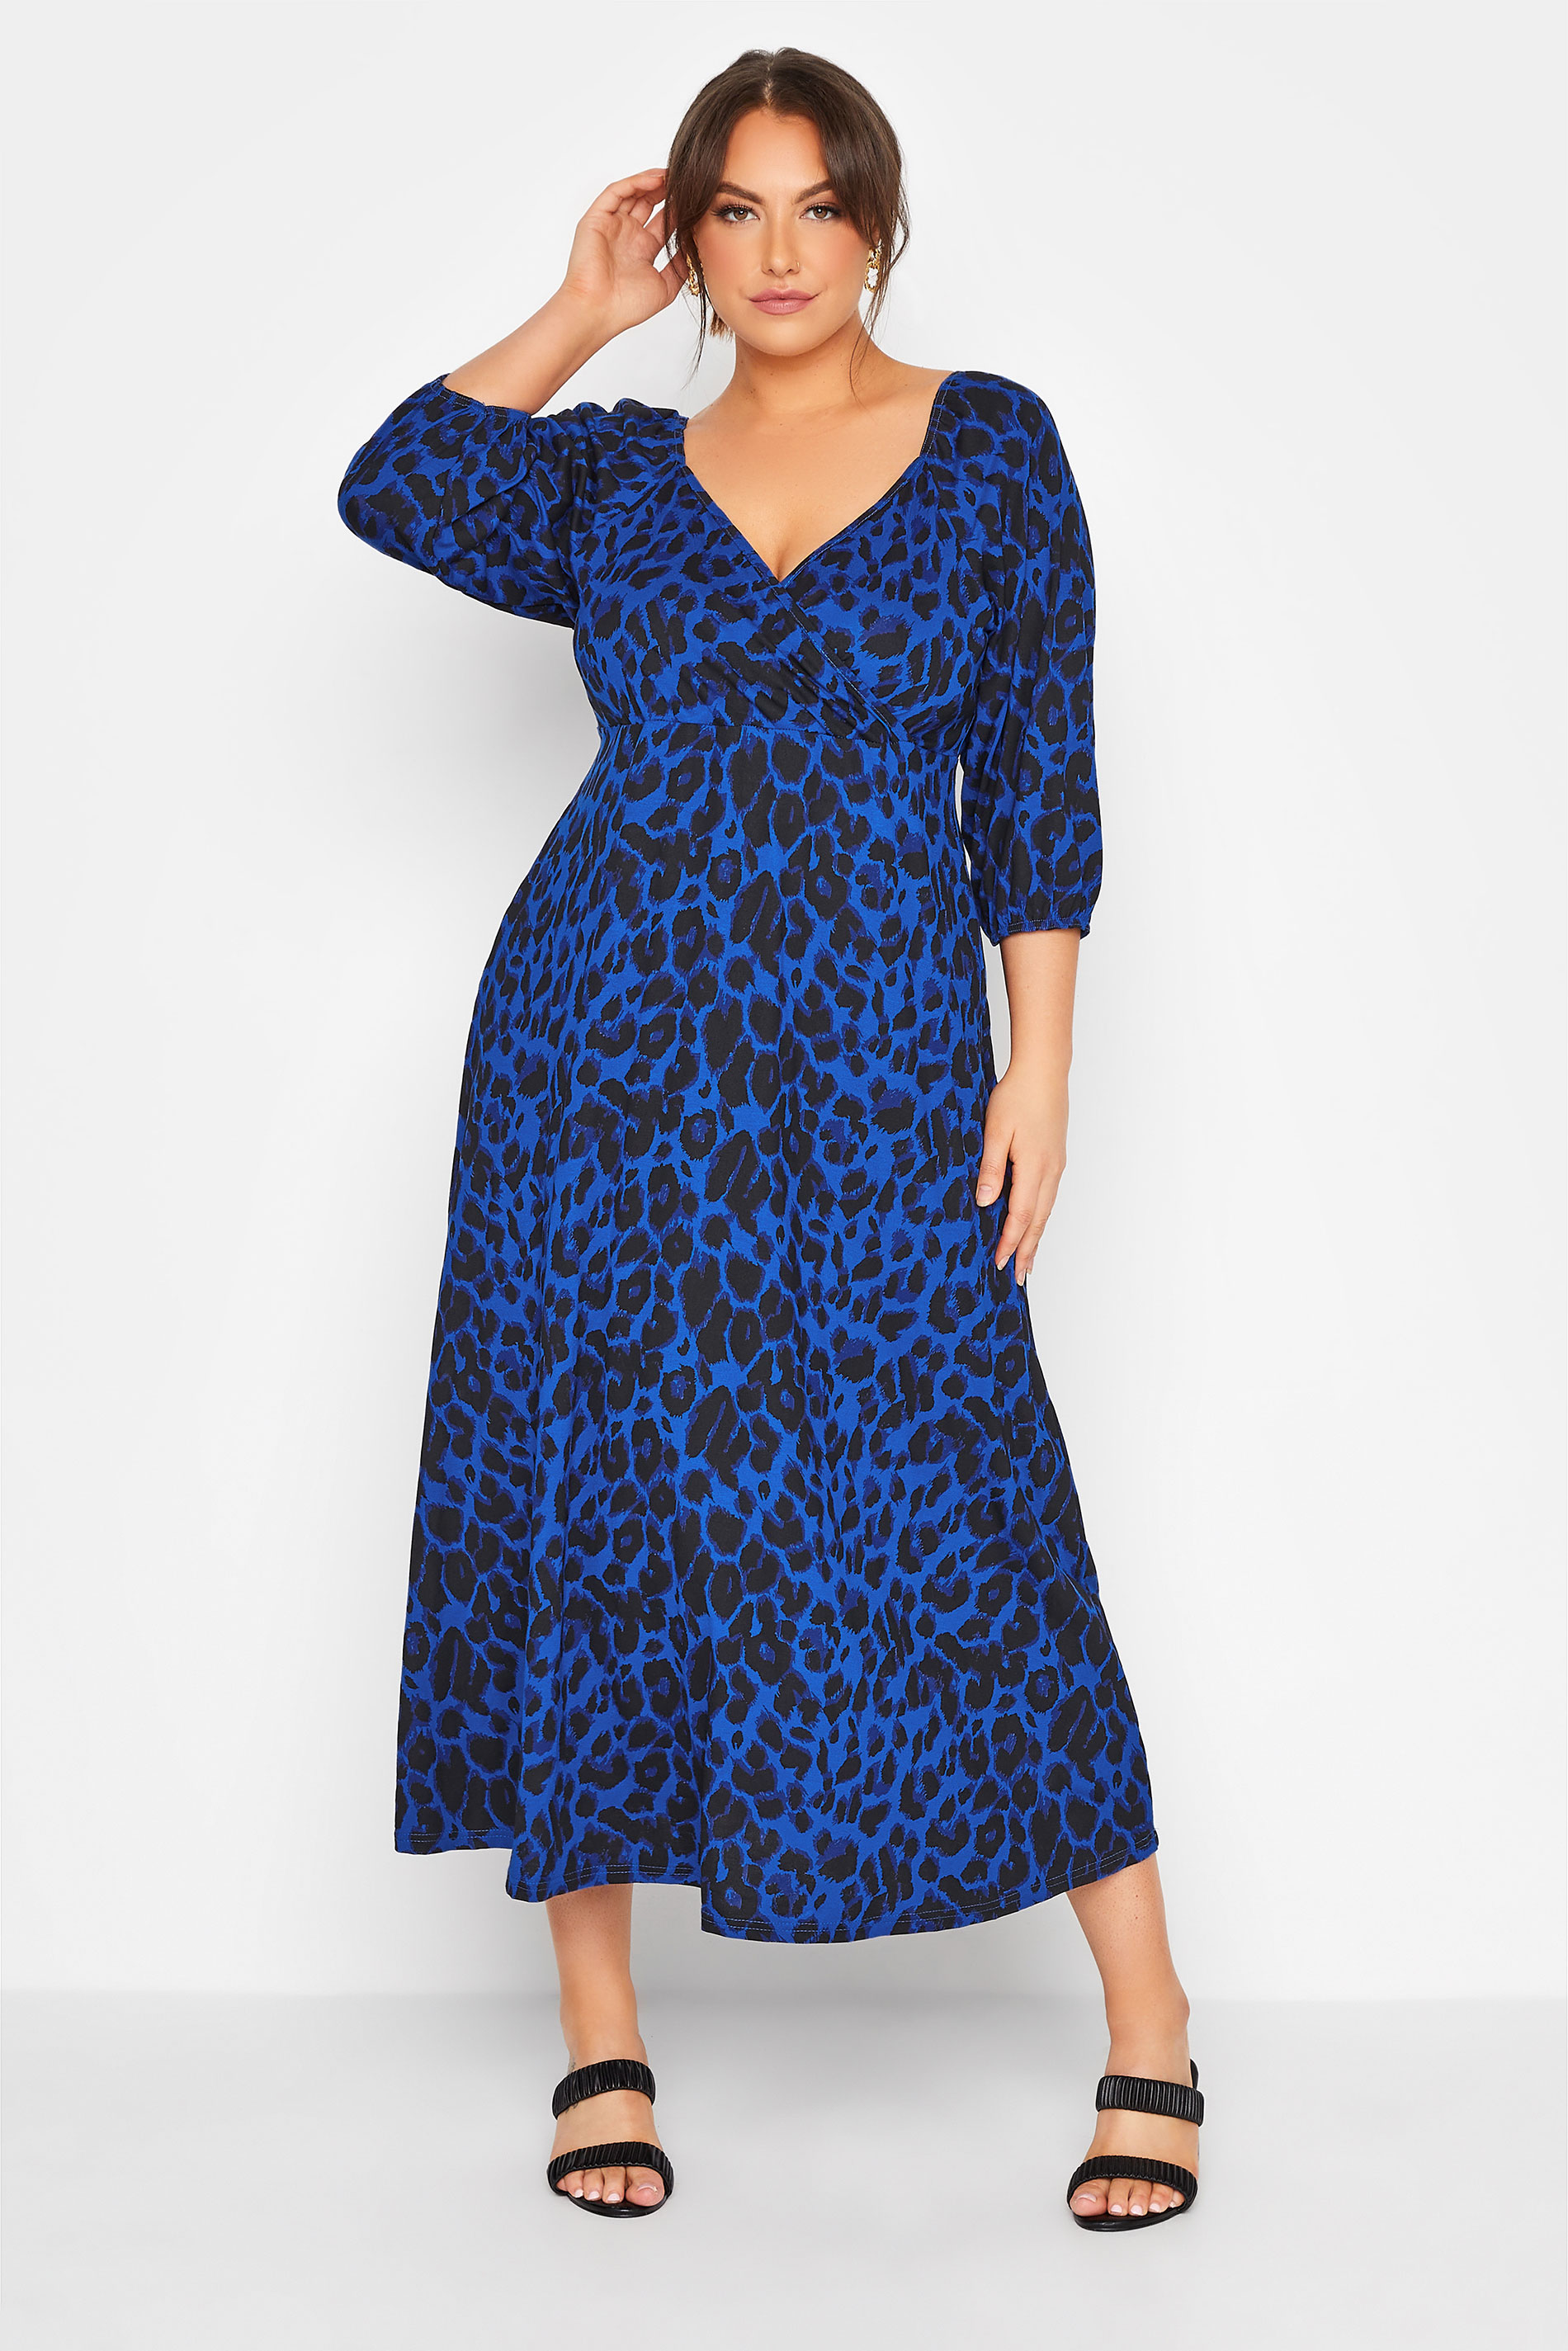 LIMITED Plus Navy Blue Leopard Wrap Milkmaid Dress | Yours Clothing